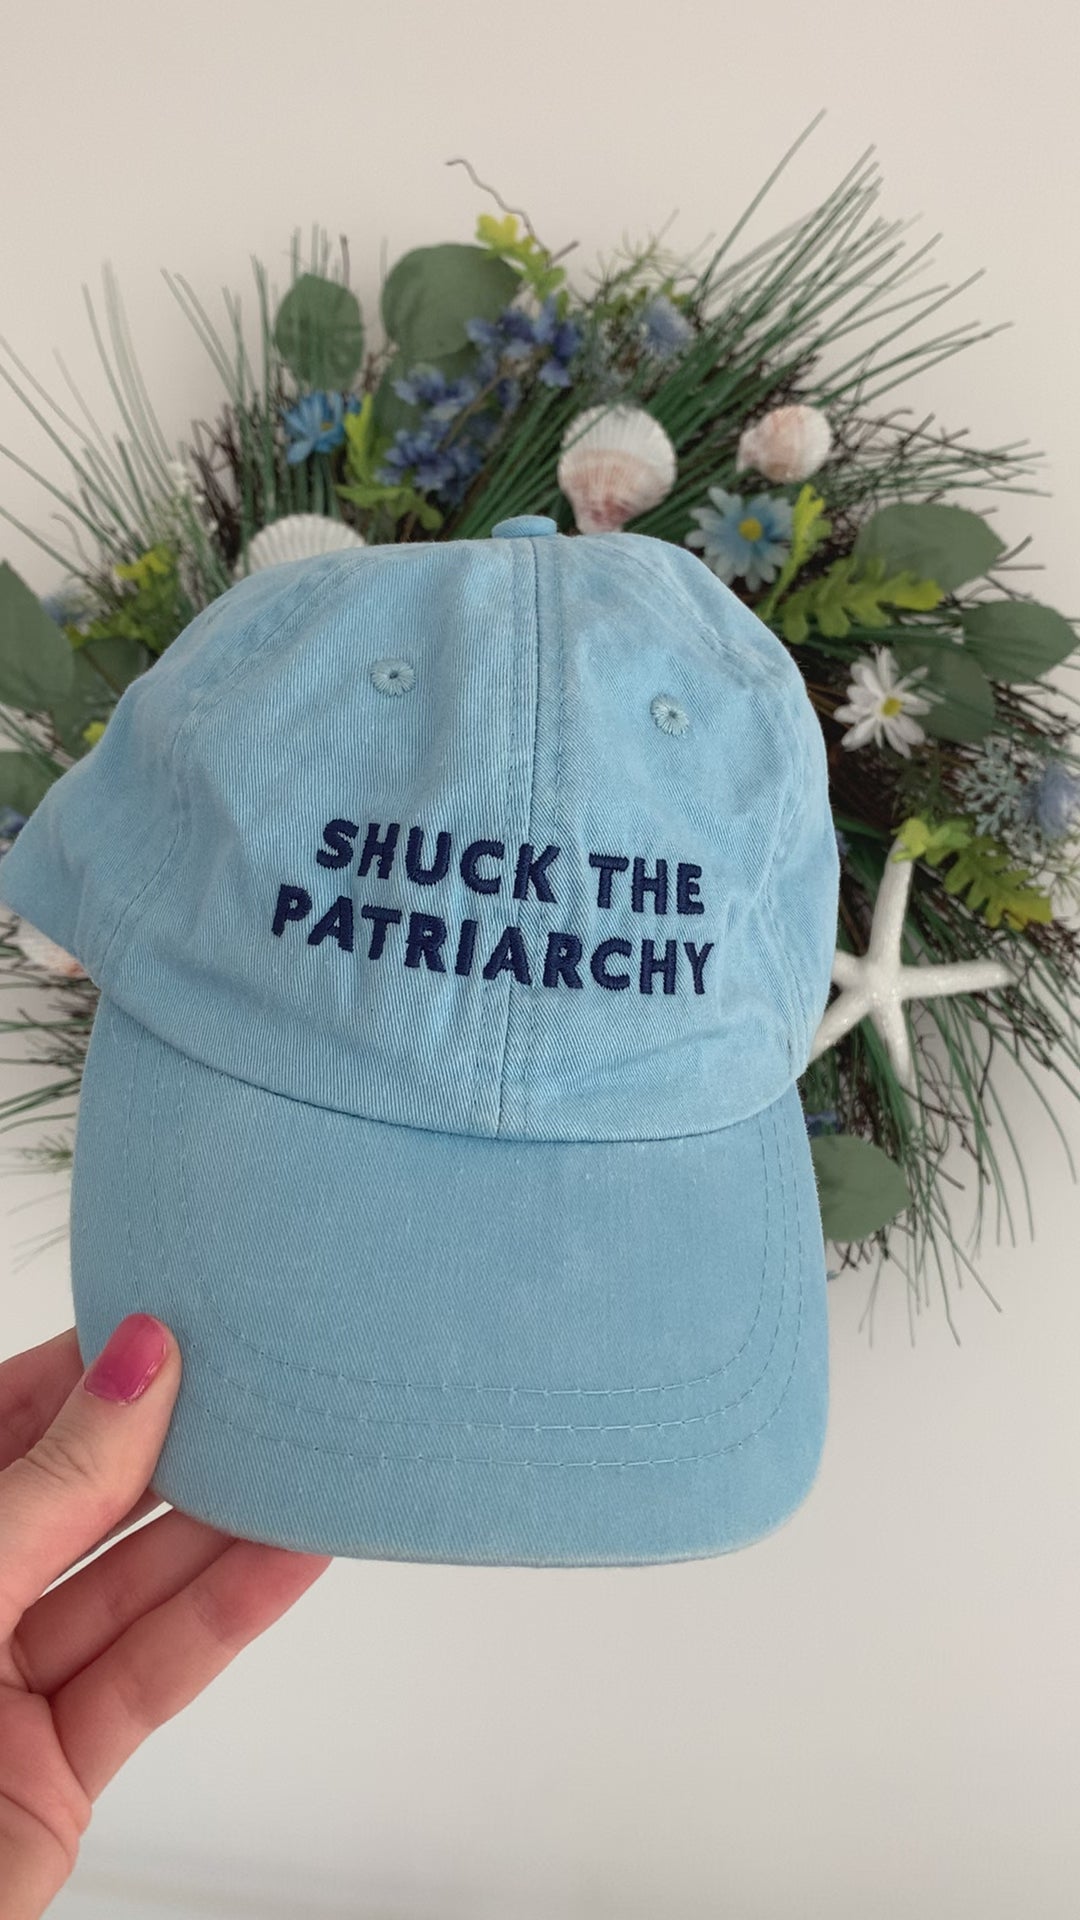 A woman holds a light blue baseball hat that reads "Shuck the Patriarchy"